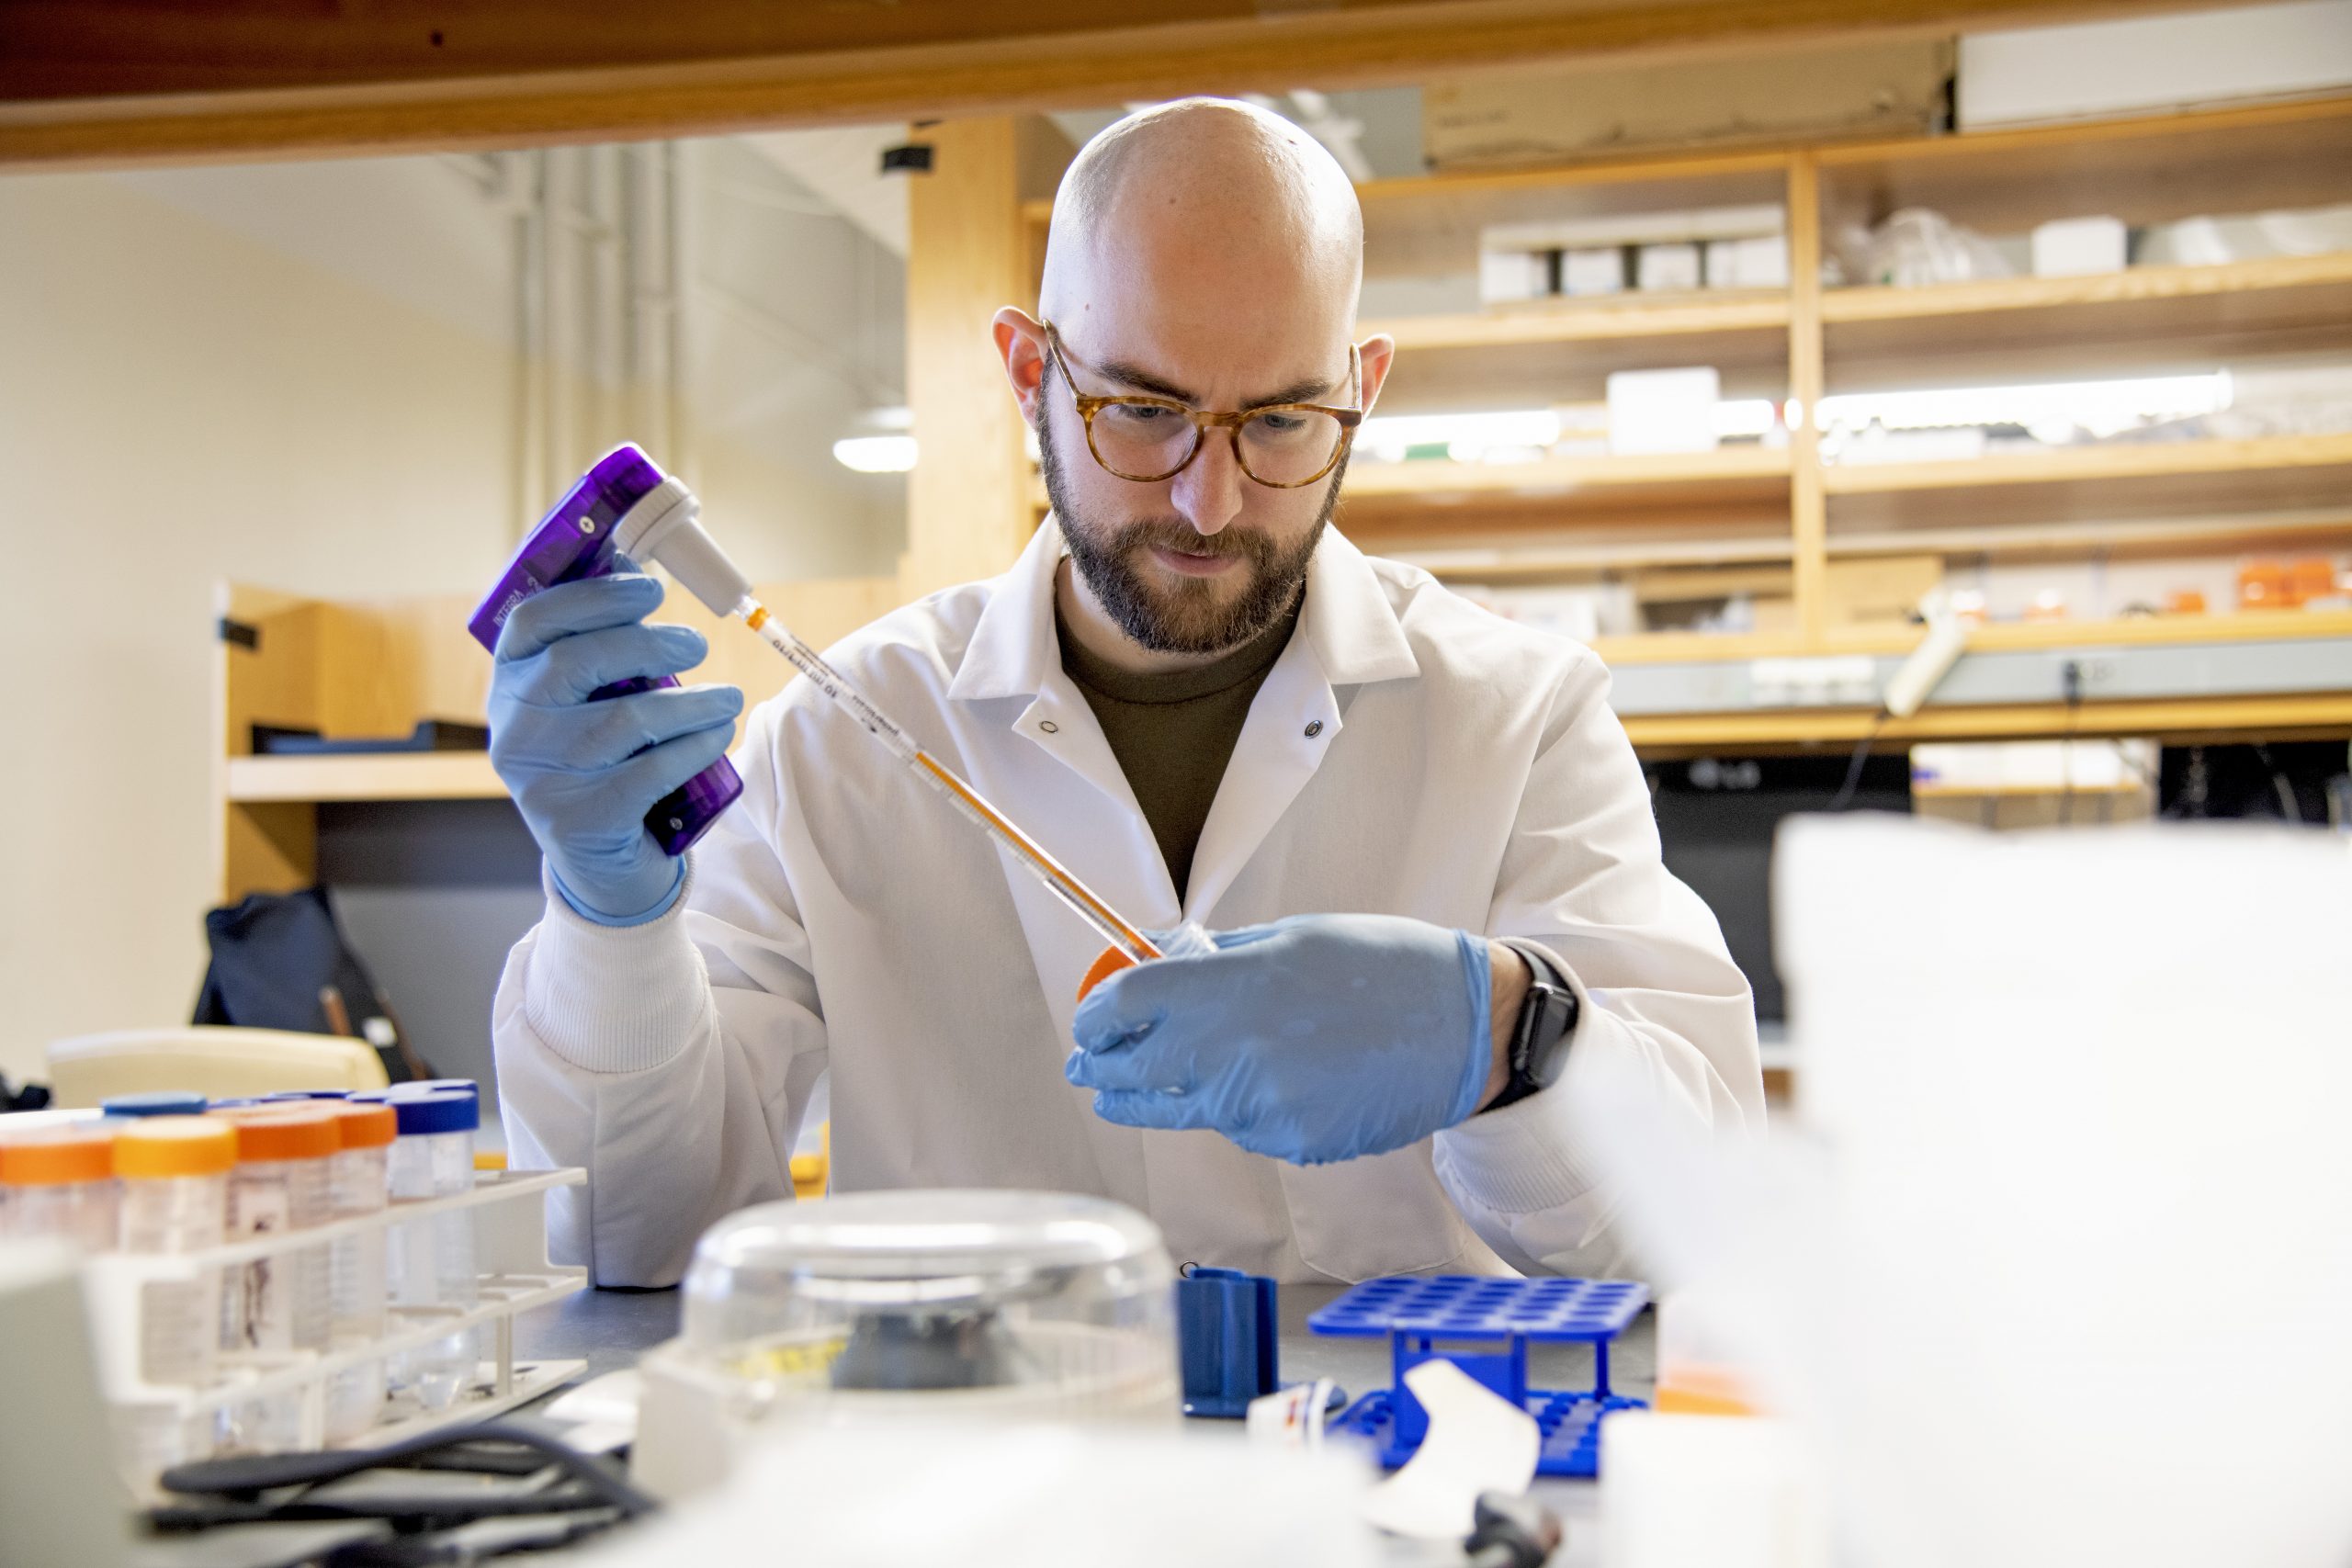 Marc Vittoria wearing a white labcoat and blue gloves working in the lab